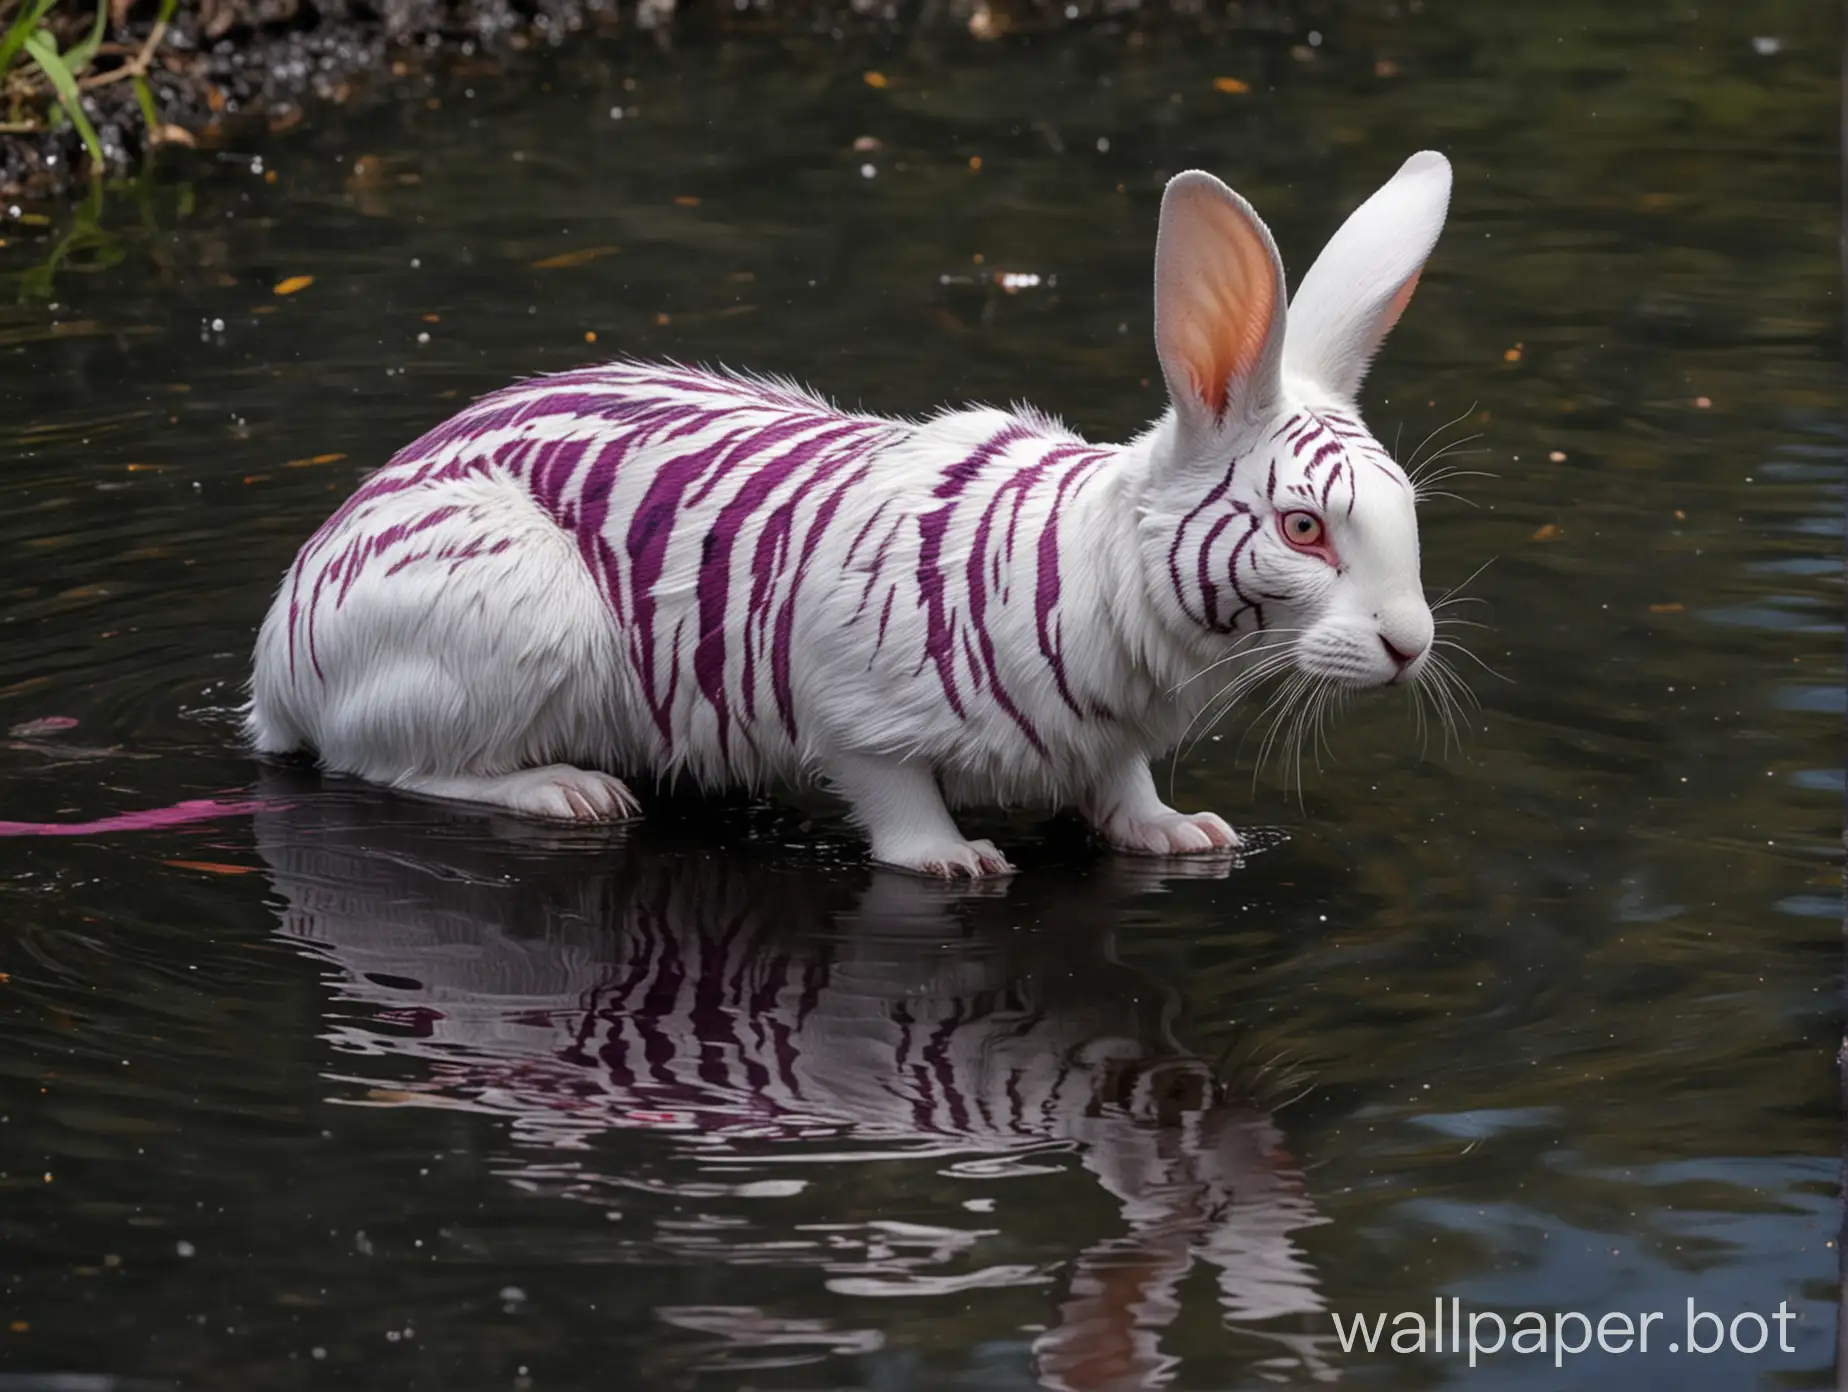 A white rabbit with purple tiger stripes, six ears, and three pink eyes walks on the surface of a reflective black pool of water